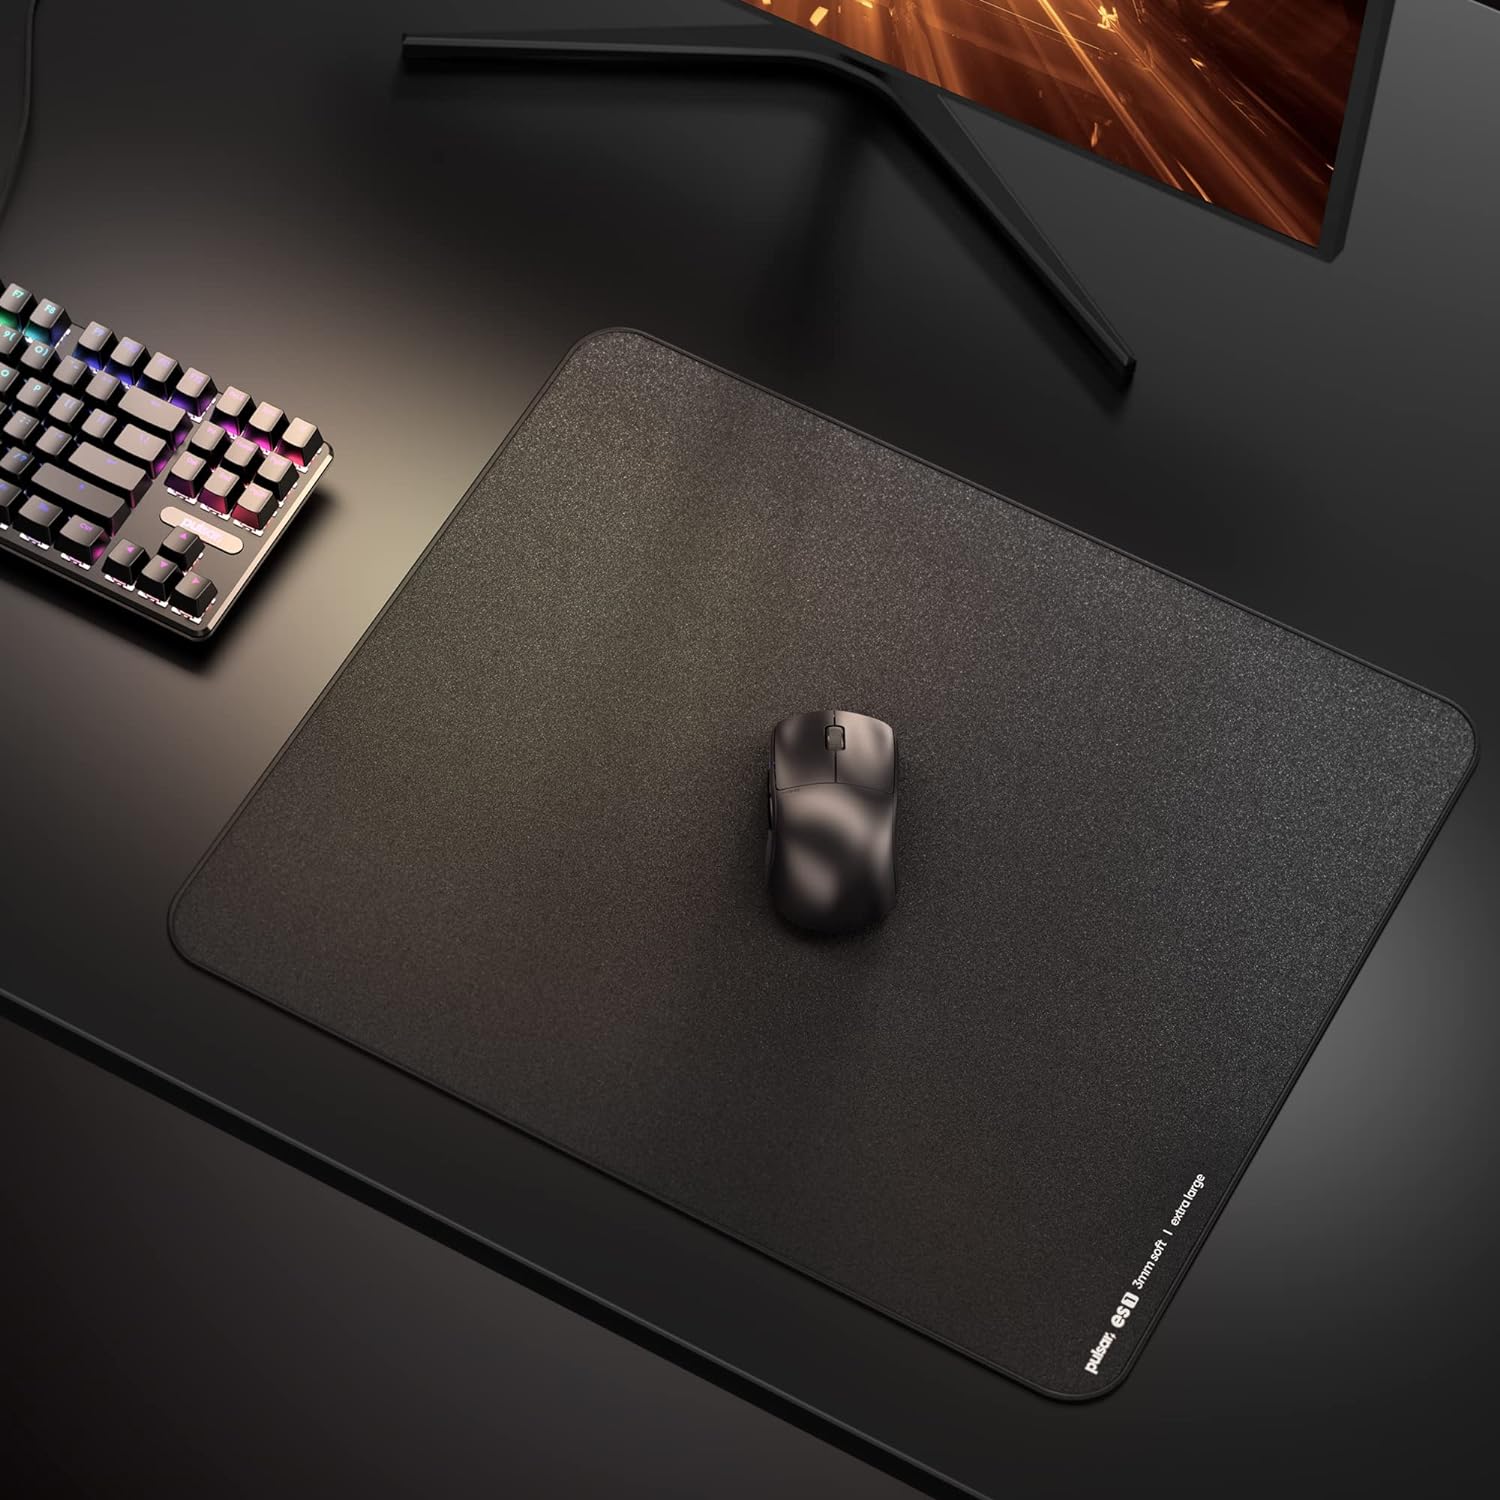 A large marketing image providing additional information about the product Pulsar ES1 Mousepad 3mm XL - Black - Additional alt info not provided